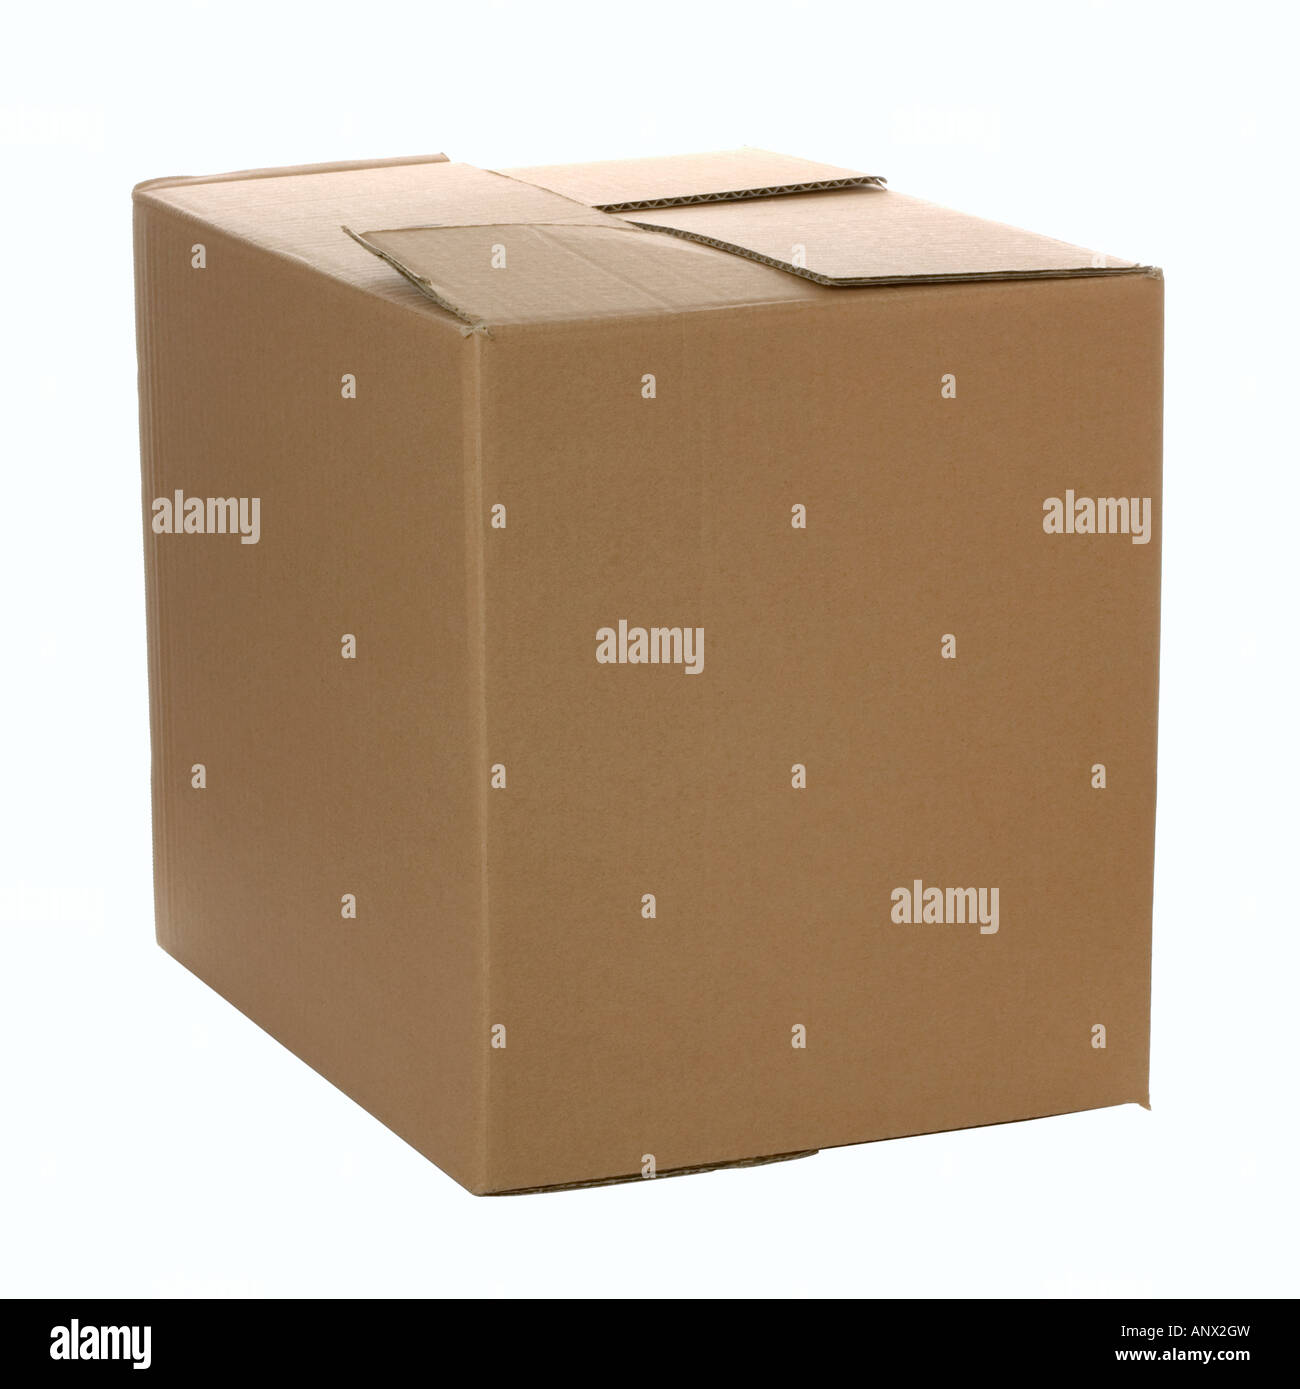 https://c8.alamy.com/comp/ANX2GW/closed-cardboard-box-add-your-own-design-or-logo-isolated-on-white-ANX2GW.jpg